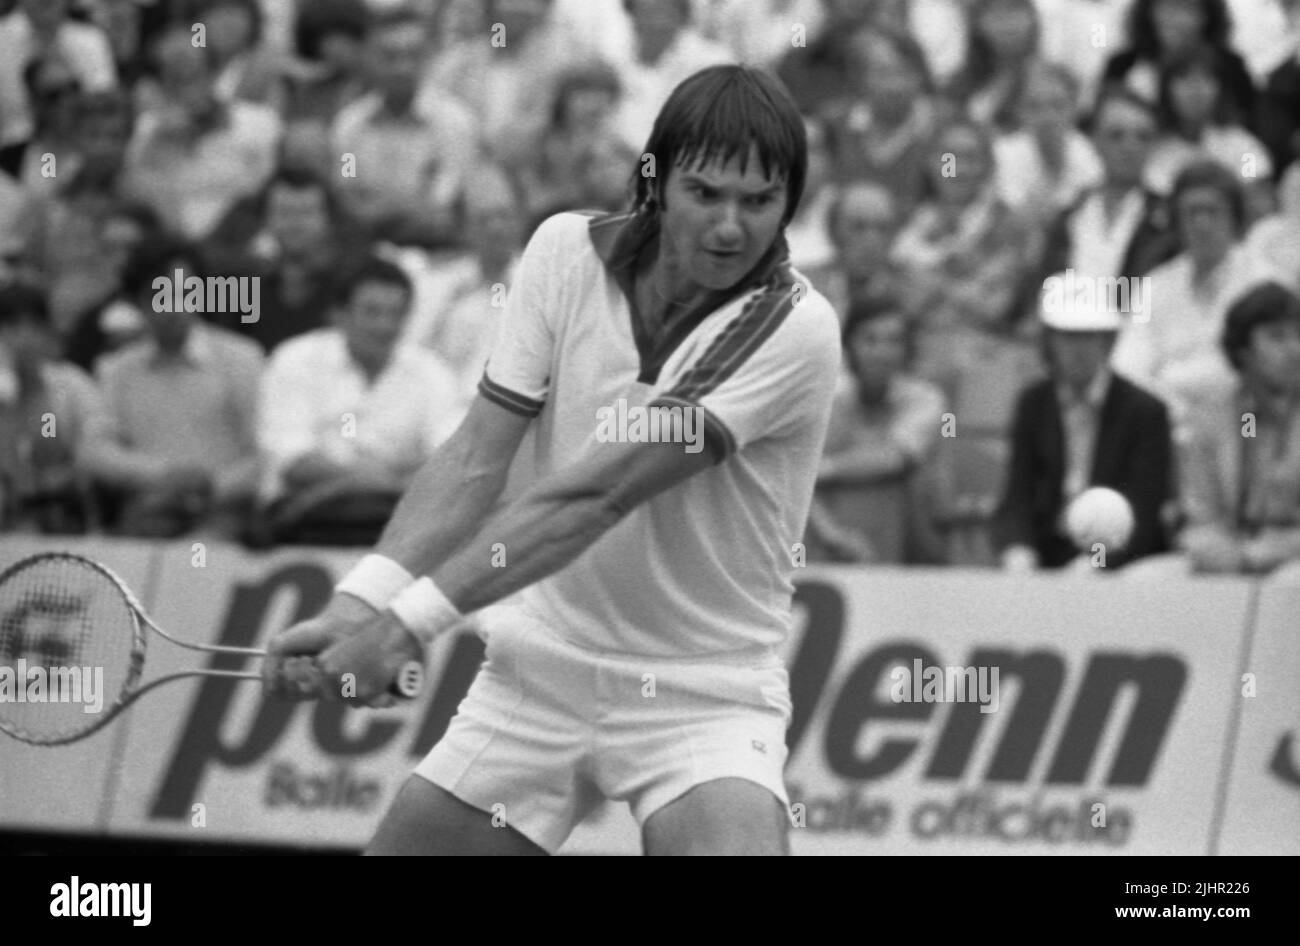 The American tennis player Jimmy Connors, attending the men's singles semi-final of the French Open (vs Paraguayan Victor Pecci). Paris, Roland-Garros stadium, June 1979 Stock Photo